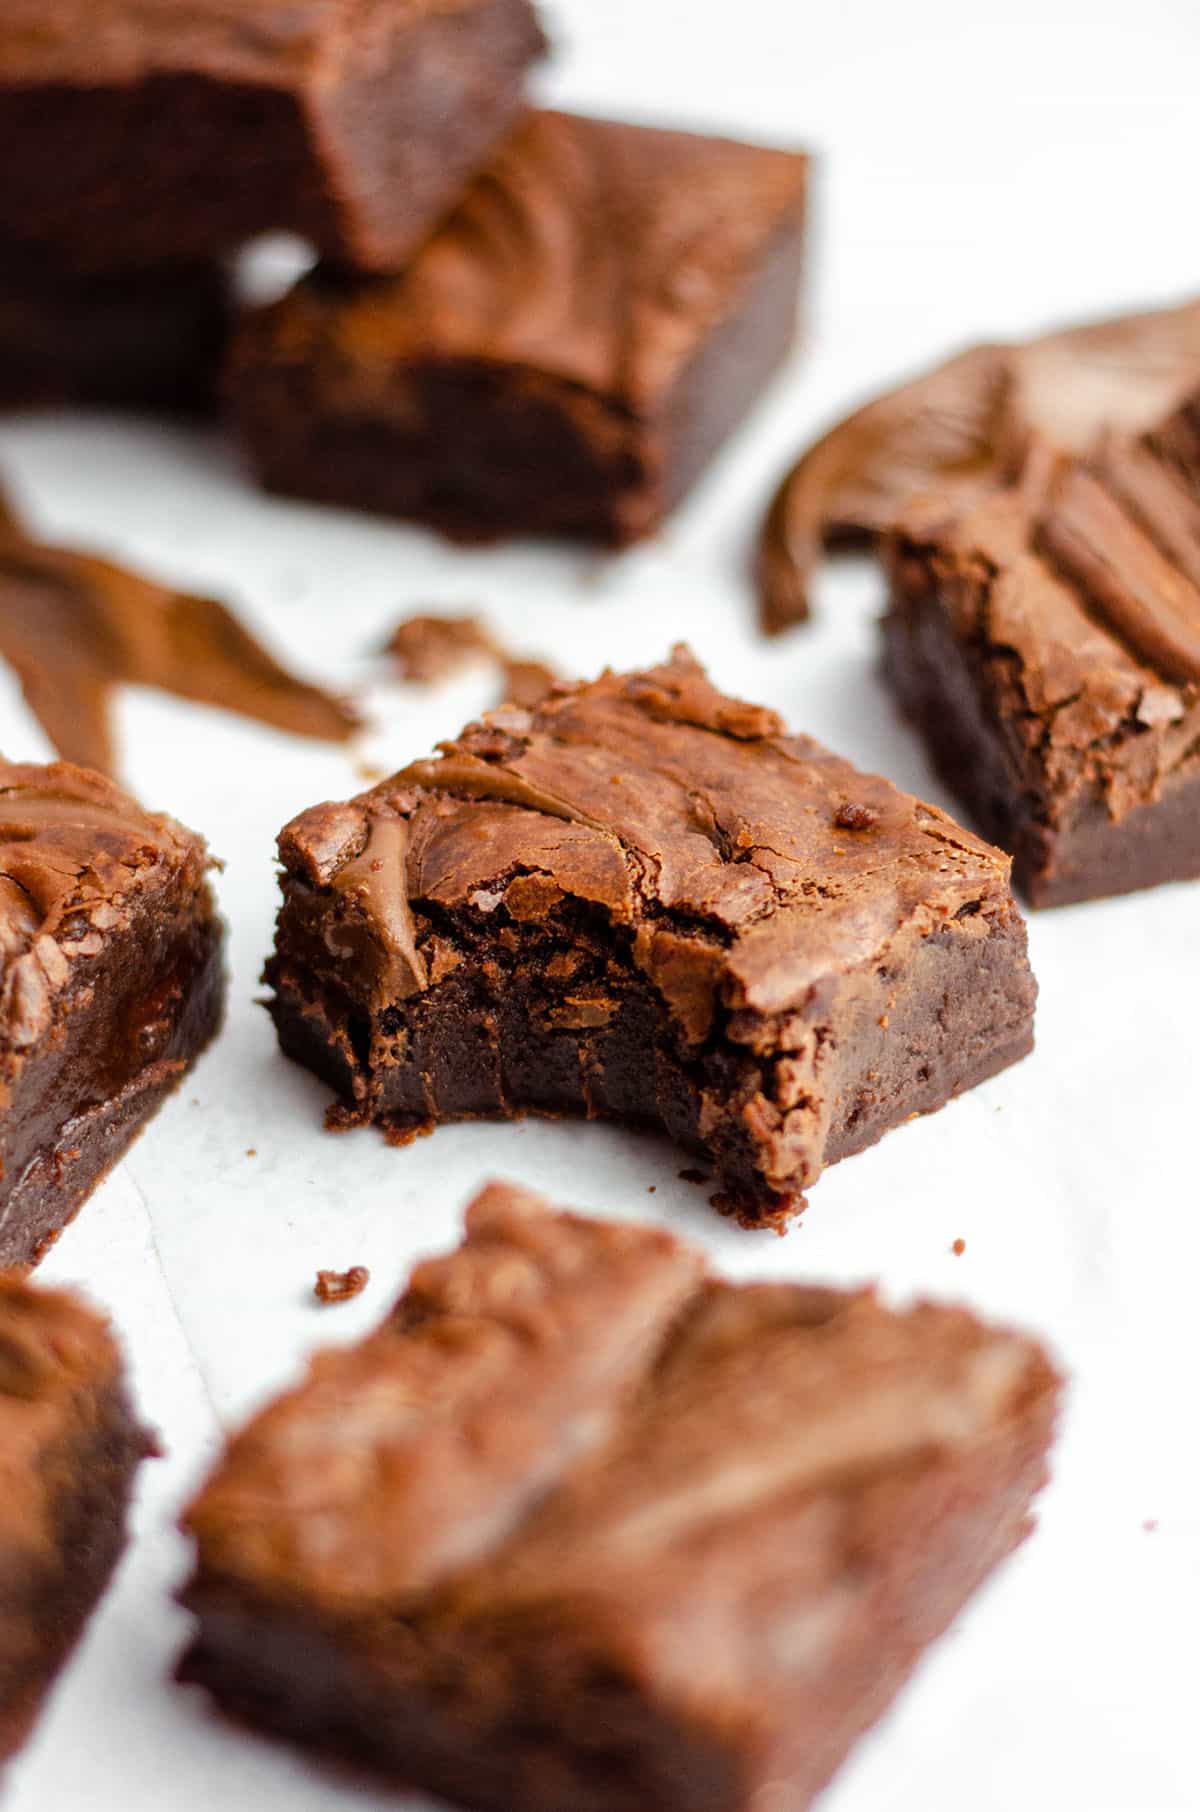 Fudgy Nutella Brownies: These seriously dense and fudgy Nutella brownies have Nutella blended right in the batter and swirled into the top. They are a chocolate lovers' dream!